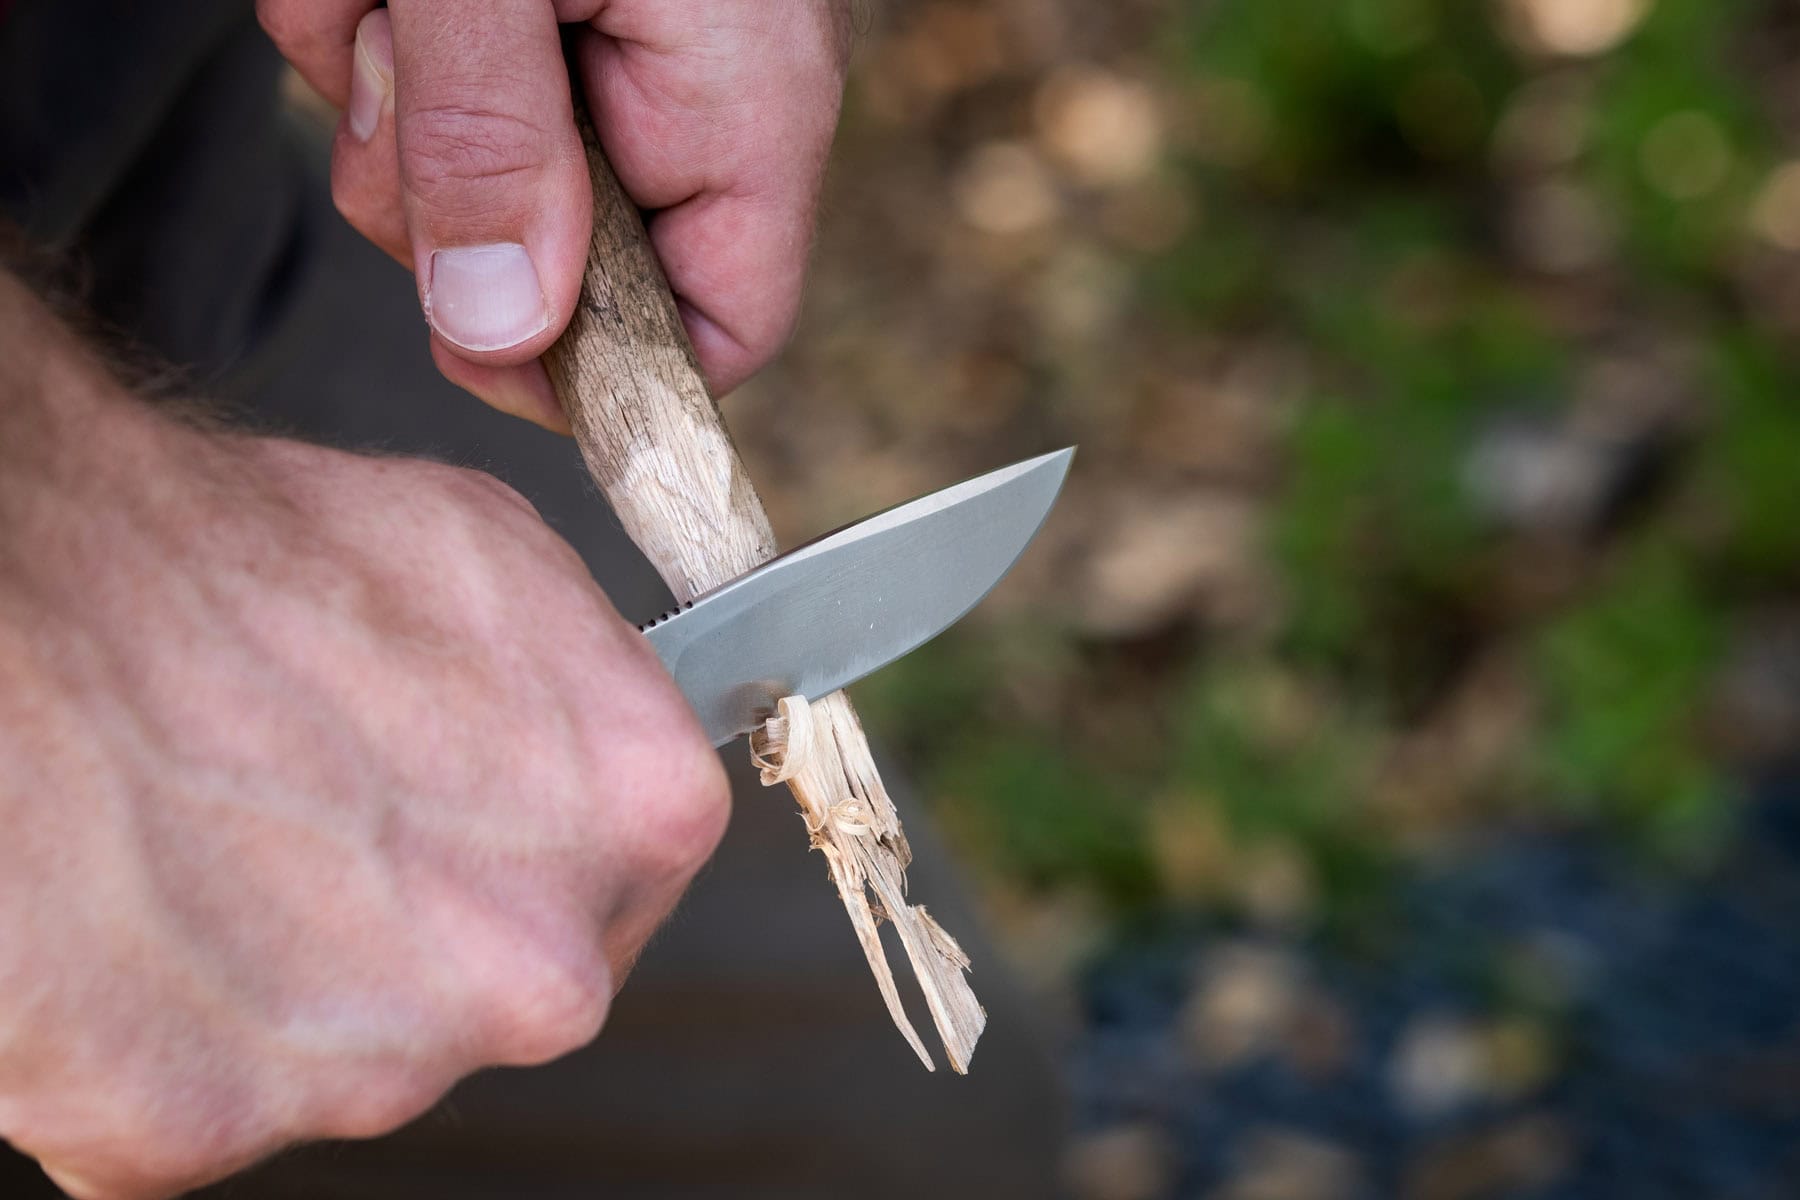 The Fast Eddie performs above its size and price tag when it comes to carving. 